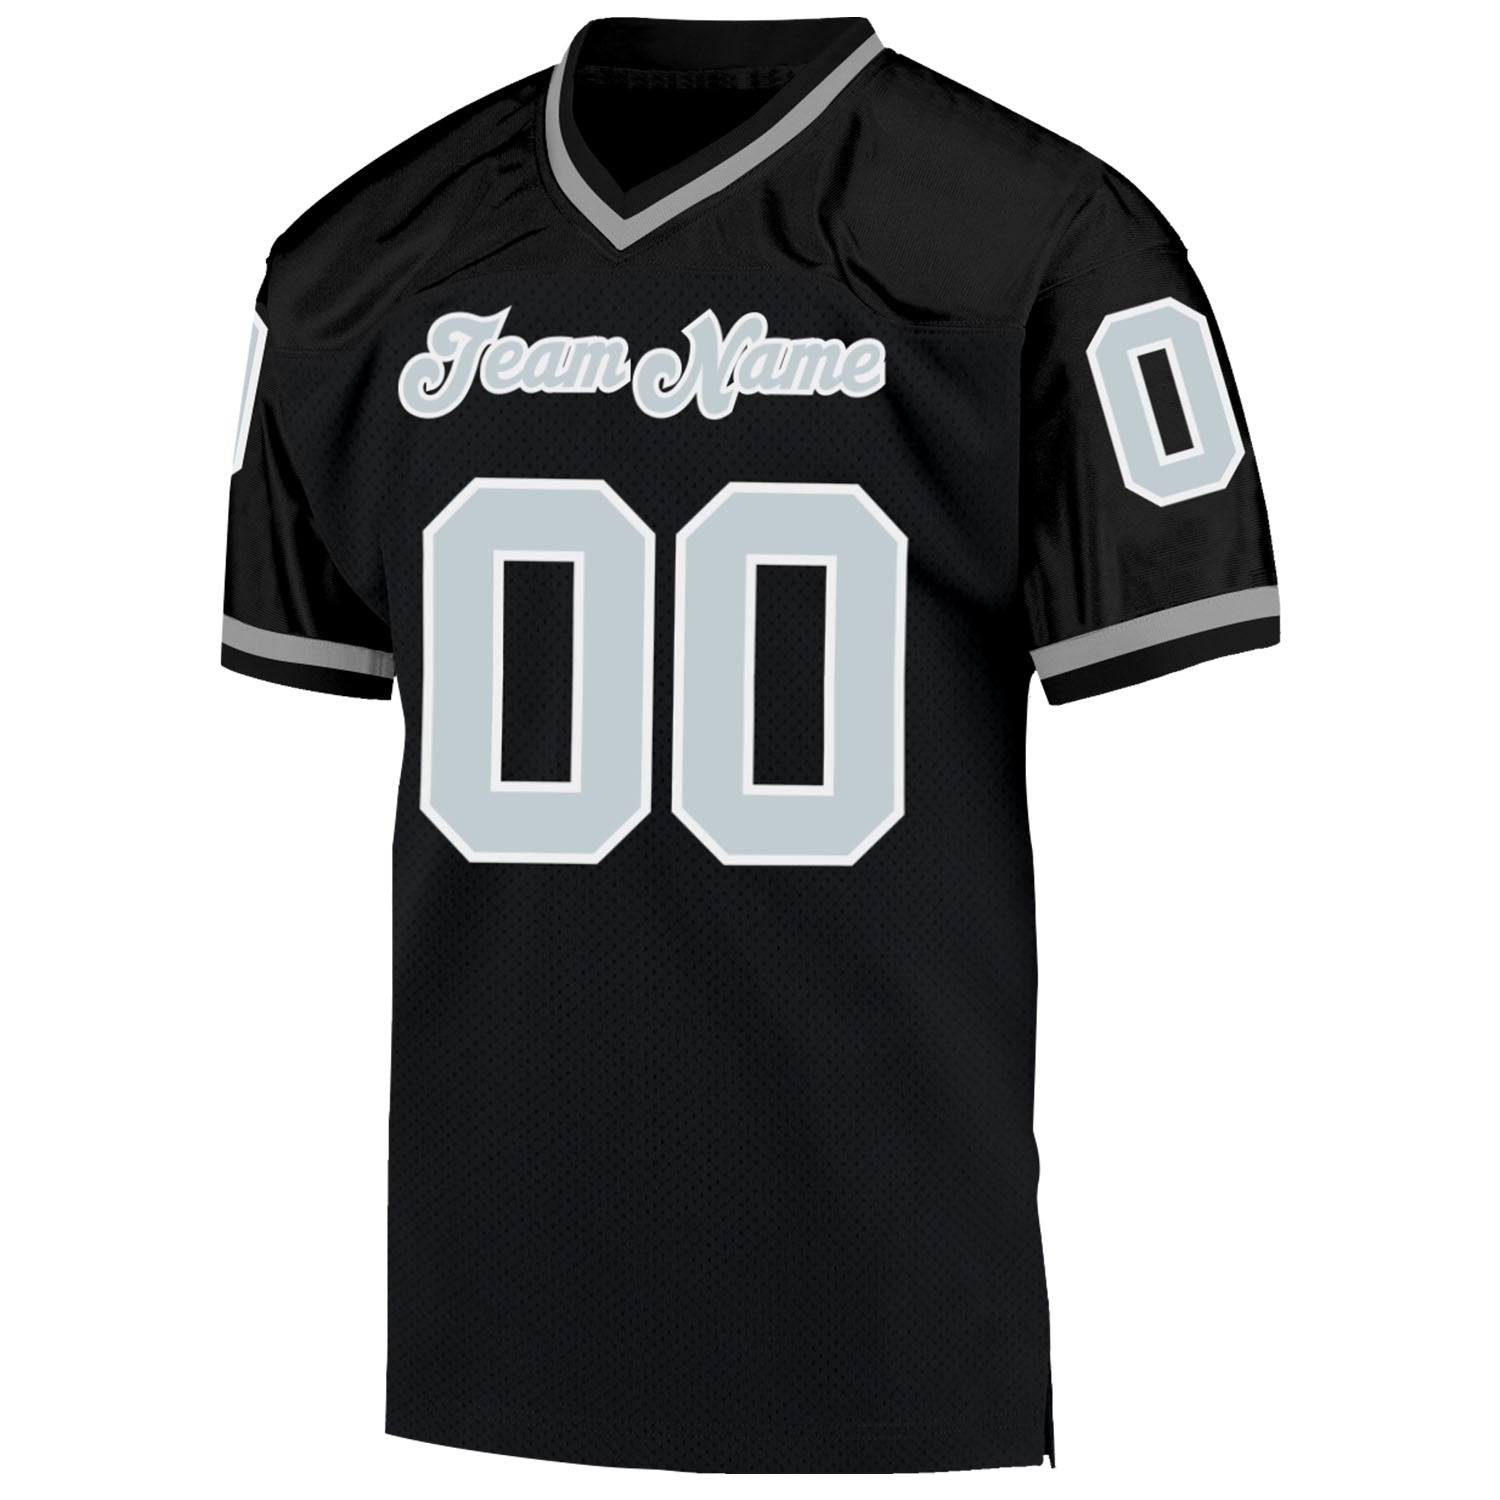 Custom Black Silver-White Mesh Authentic Throwback Football Jersey